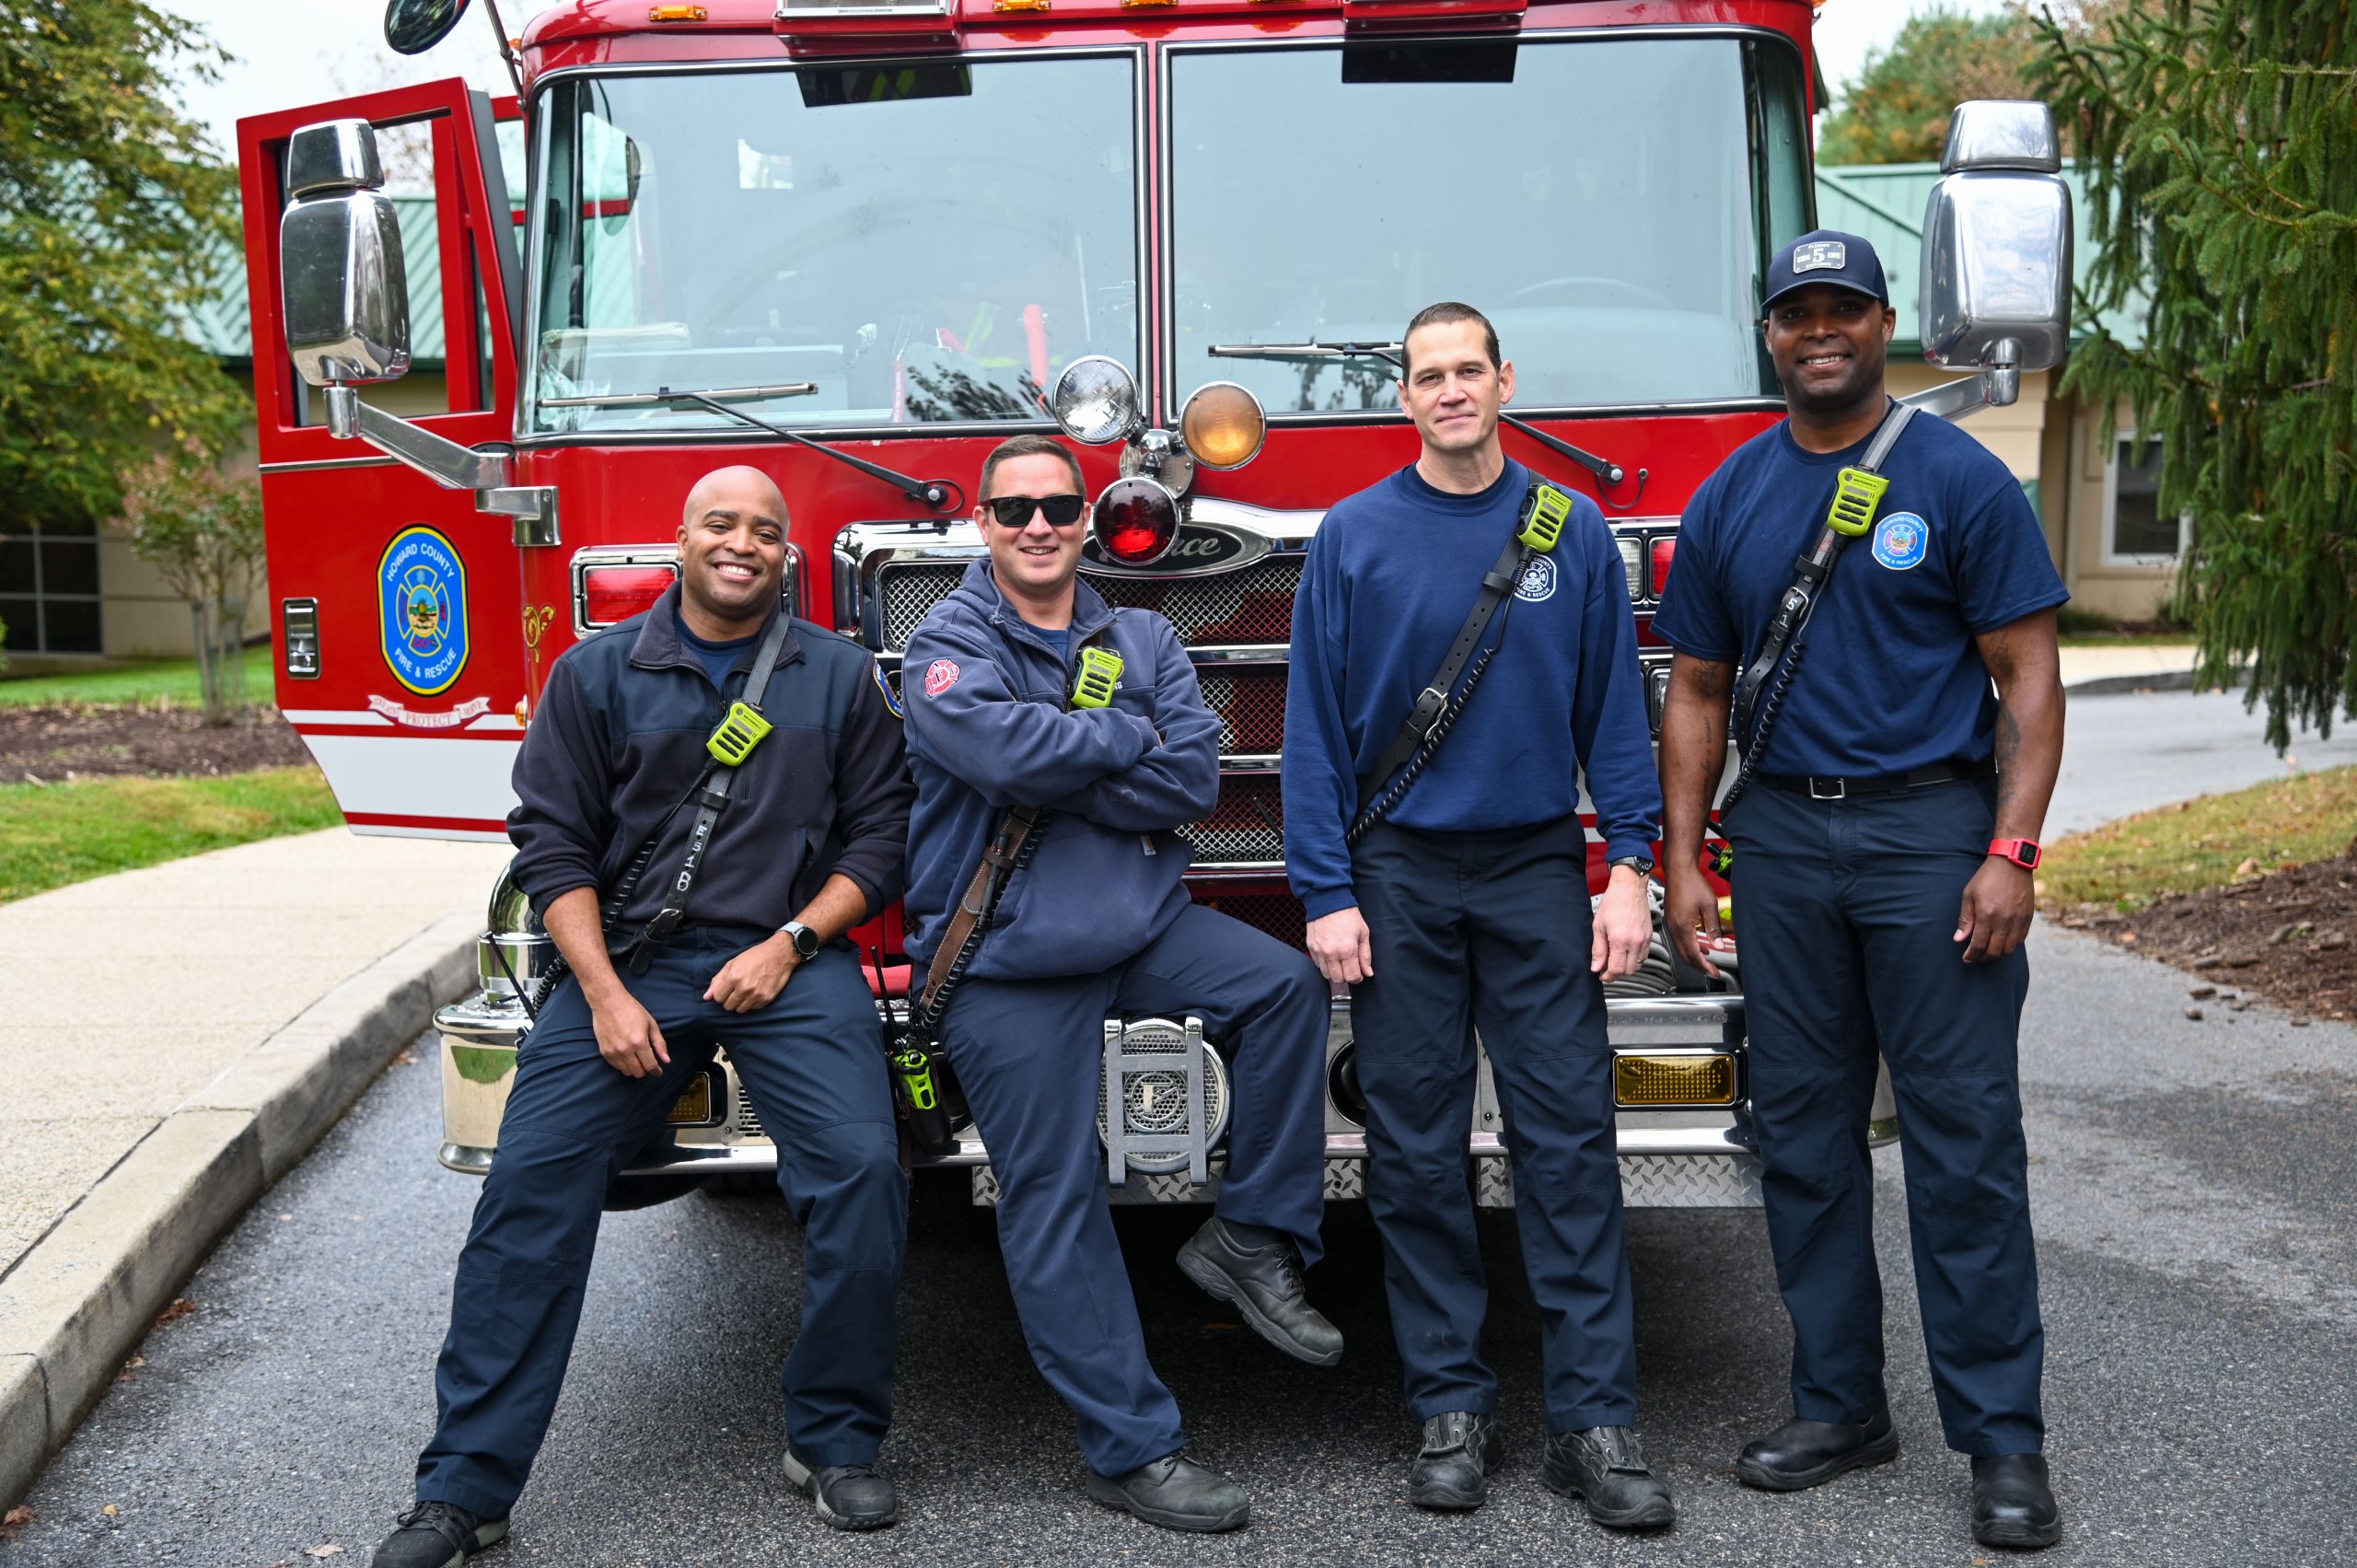 Fire safety experts—volunteer firefighters—stand in front of their fire engine truck.